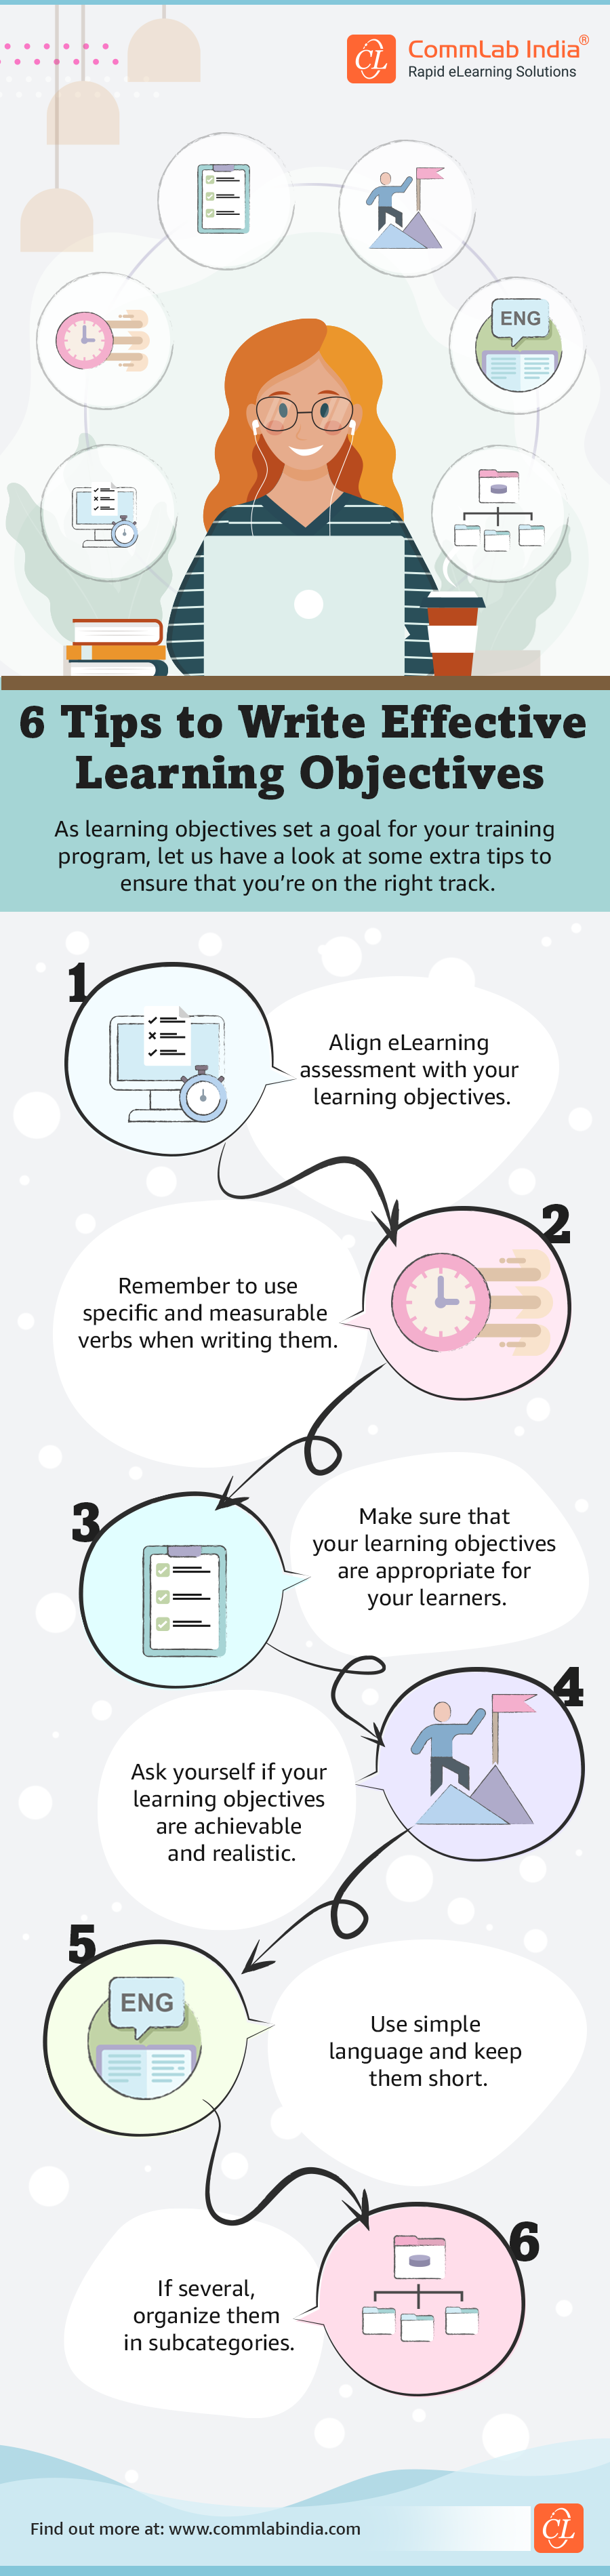 Effective Tips to Write Learning Objectives